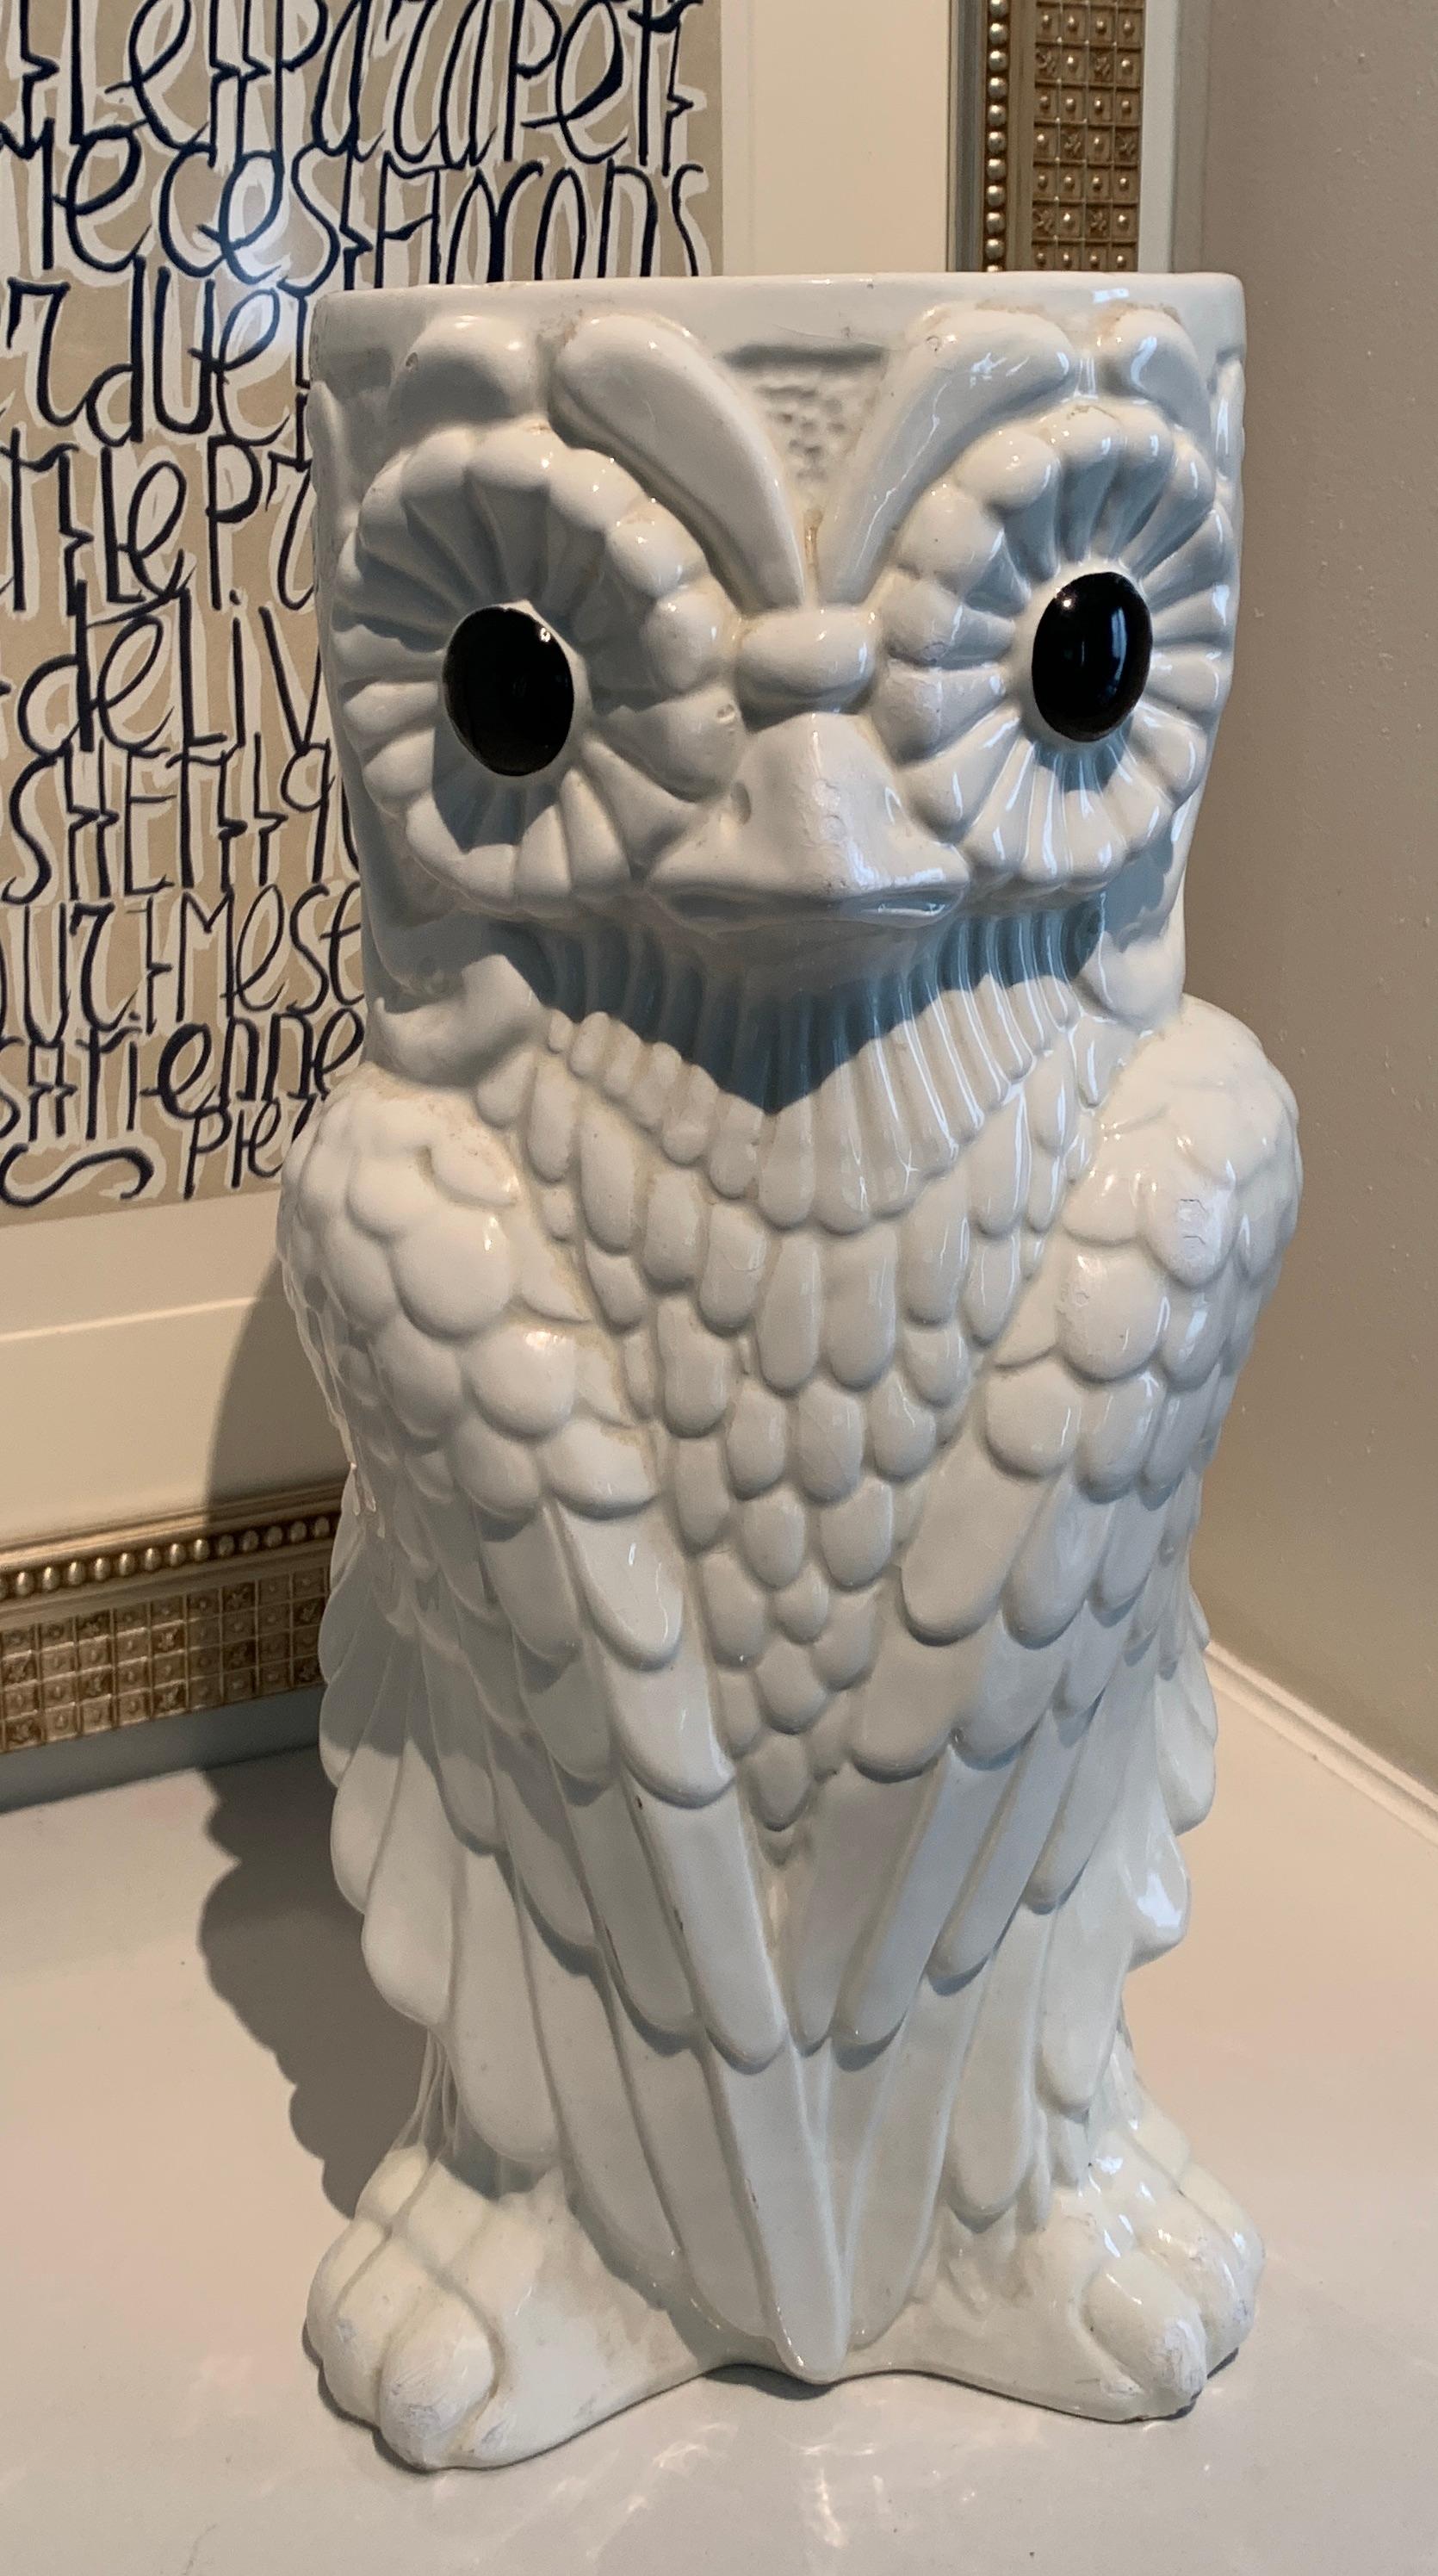 A wonderful ceramic umbrella stand in the likeness of an owl - ready for those wet umbrellas at your door. The piece is in very good condition with no chip or cracks, is water tight (one place the glaze at the rim, but not a chip).